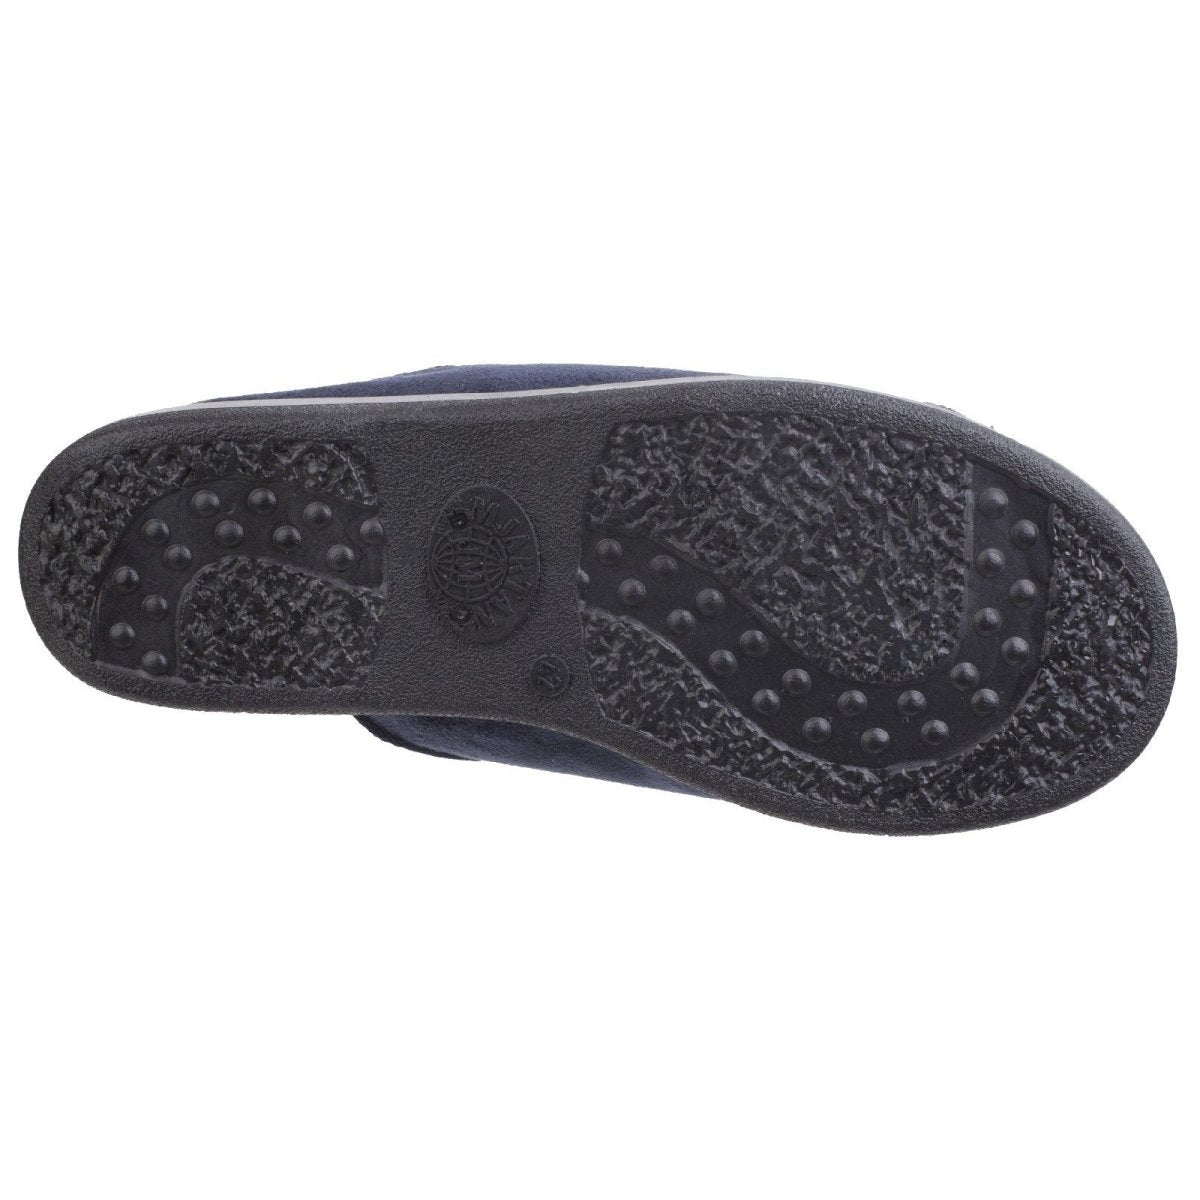 GBS Medical Walton 3E Extra Wide Fit Touch Fastening Slippers - Shoe Store Direct